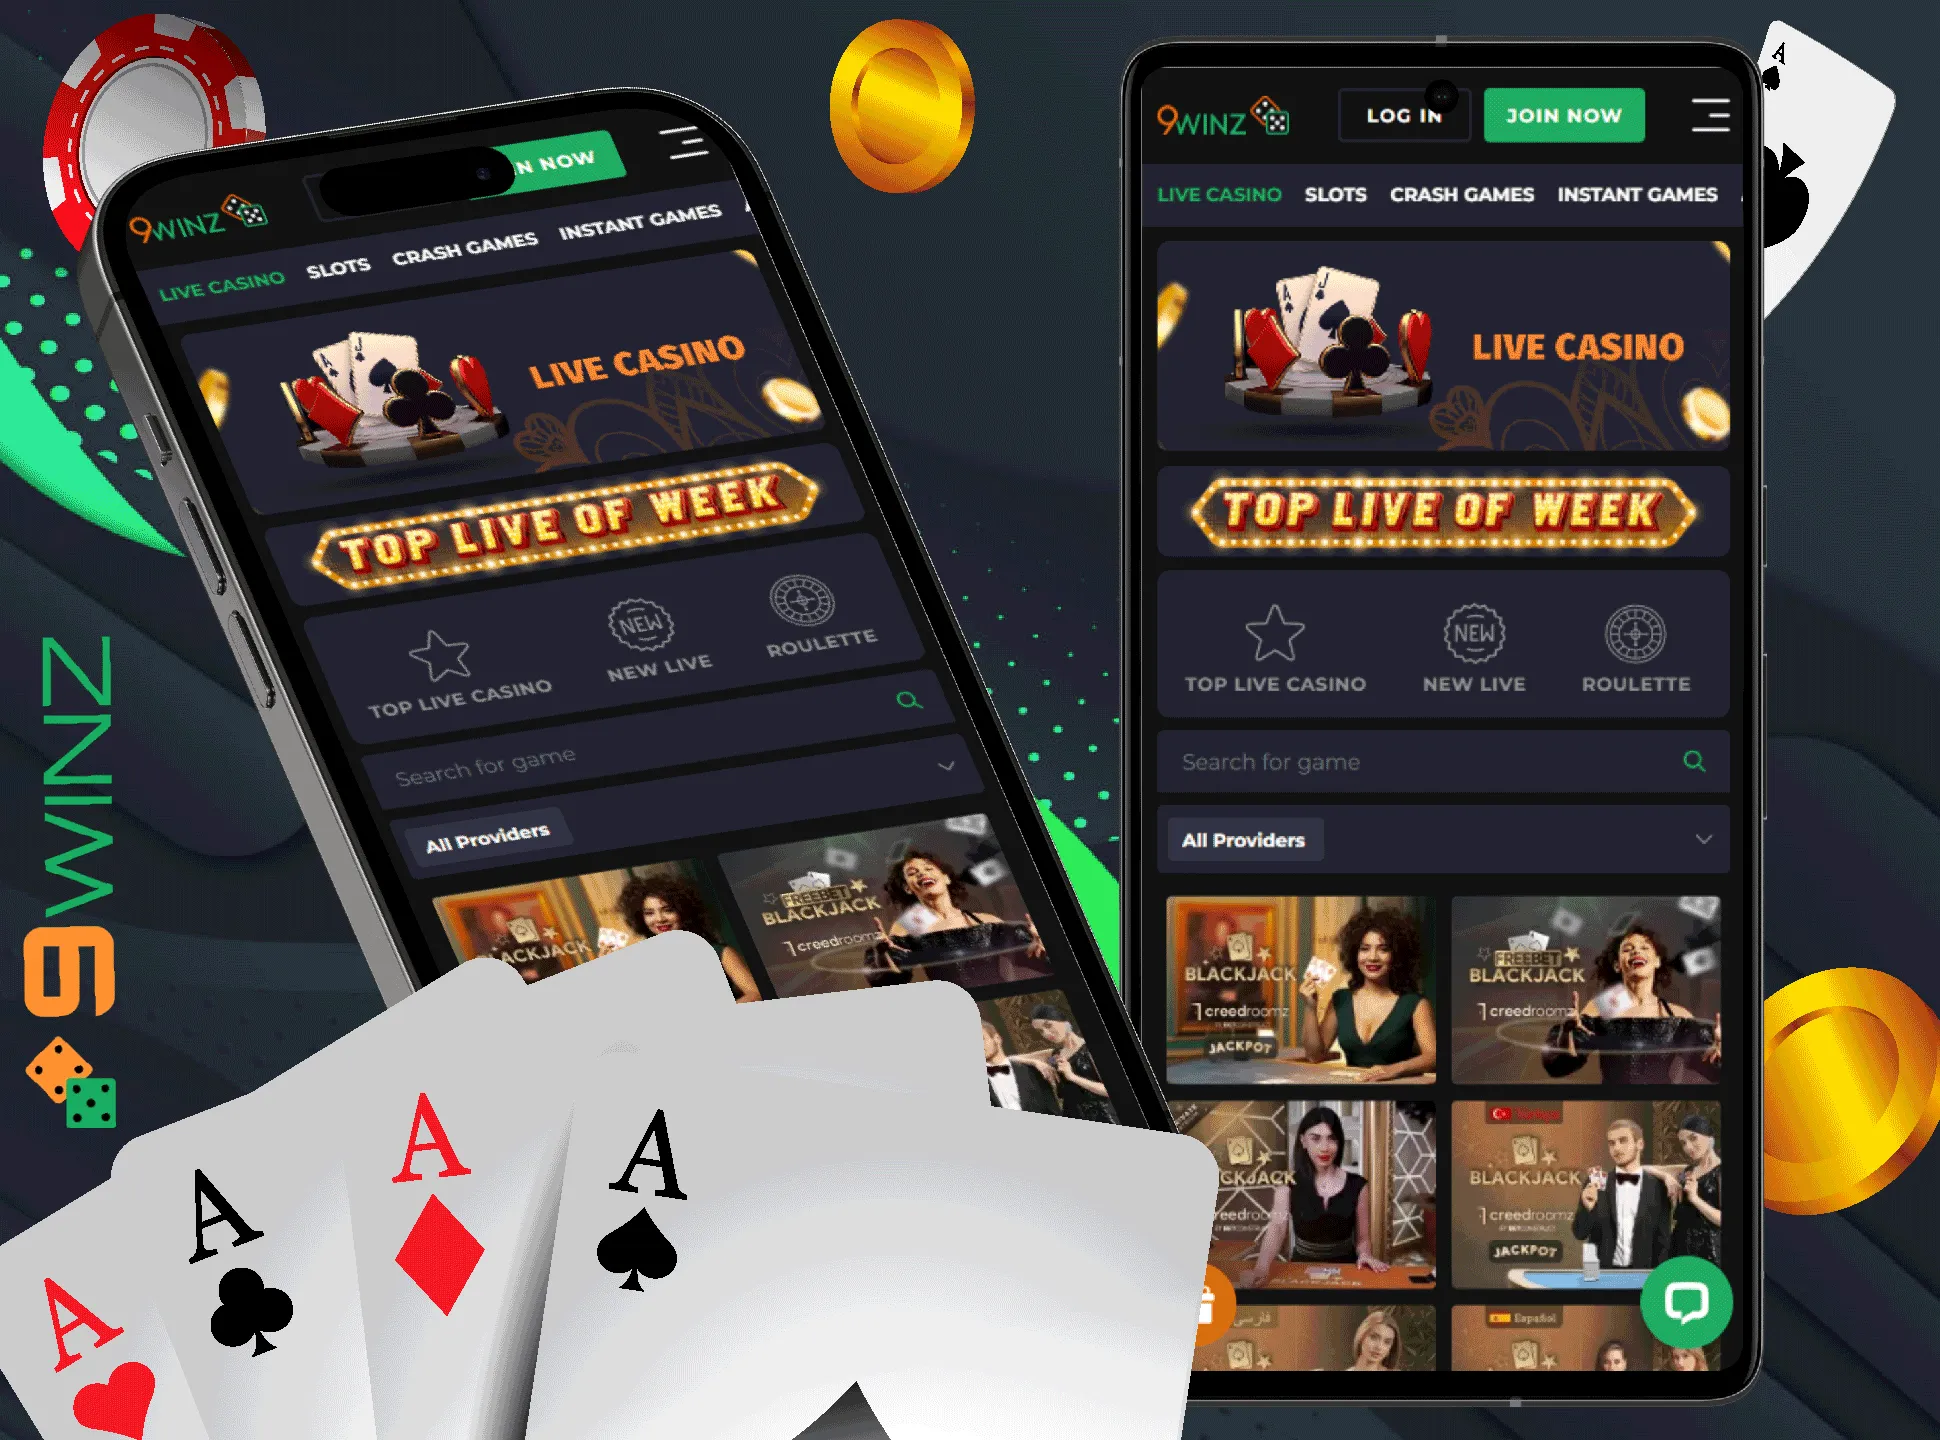 Use the 9winz app for better blackjack experience.